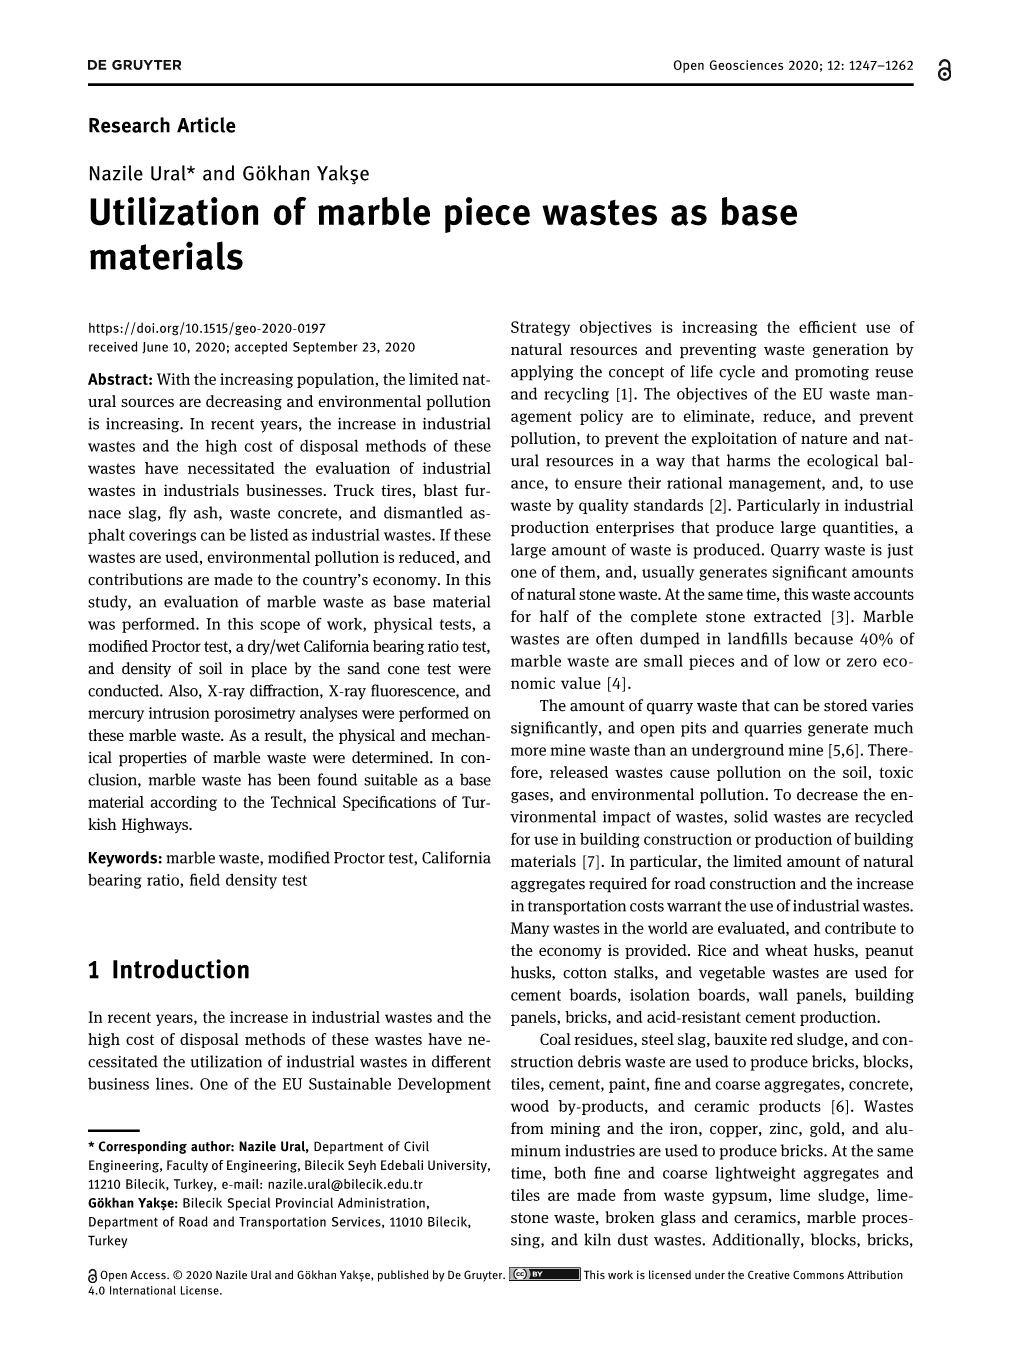 Utilization of Marble Piece Wastes As Base Materials